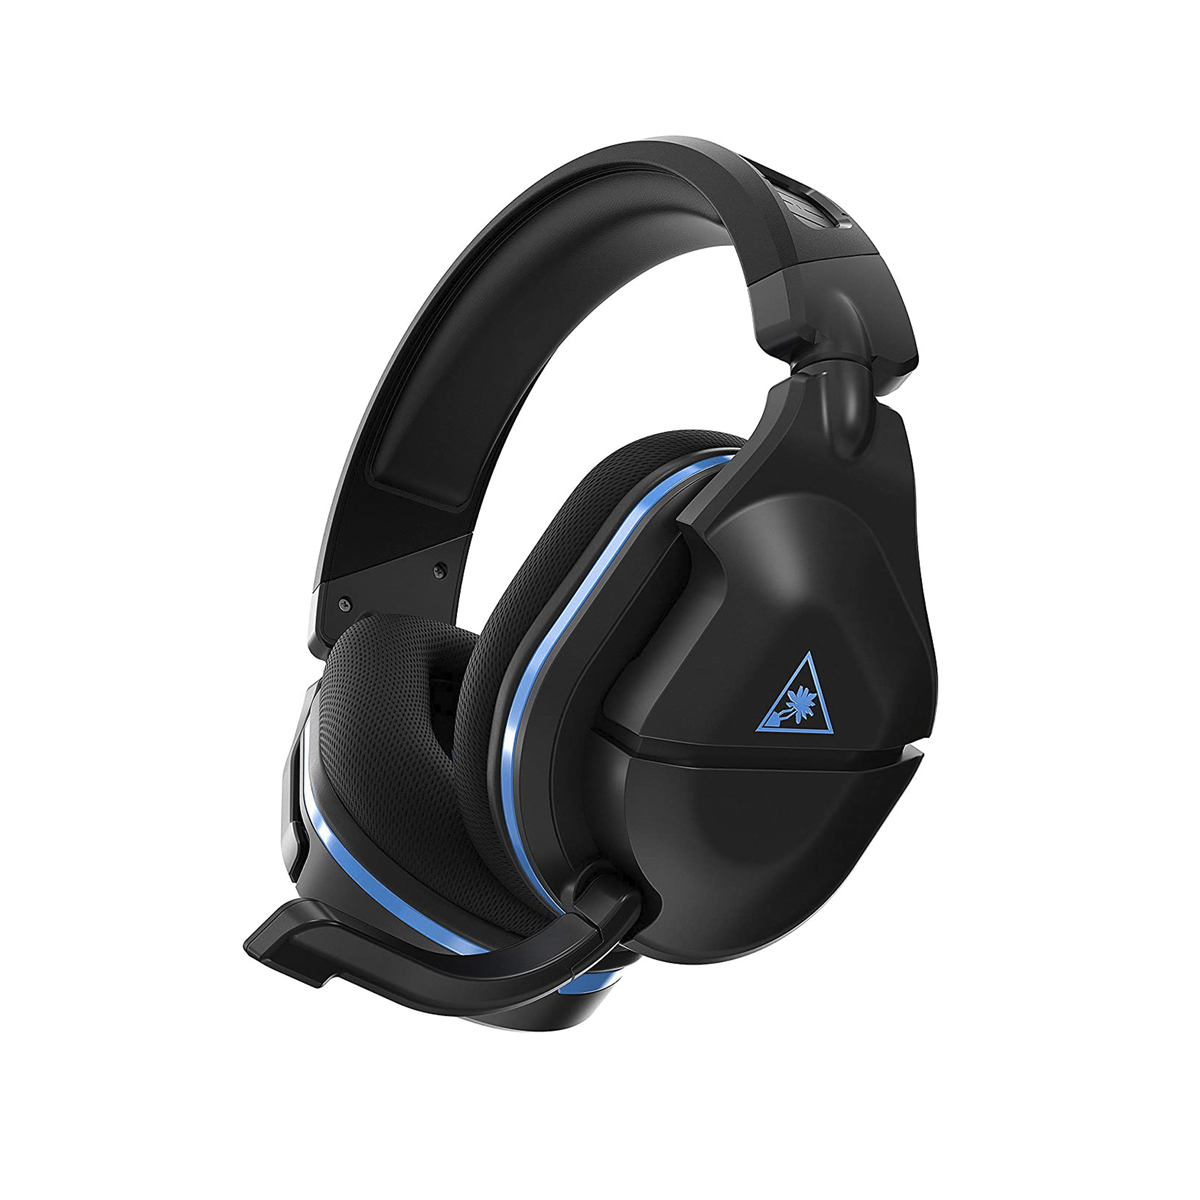 Turtle Beach Stealth 600 Gen 2 Wireless Gaming Headset for PS4